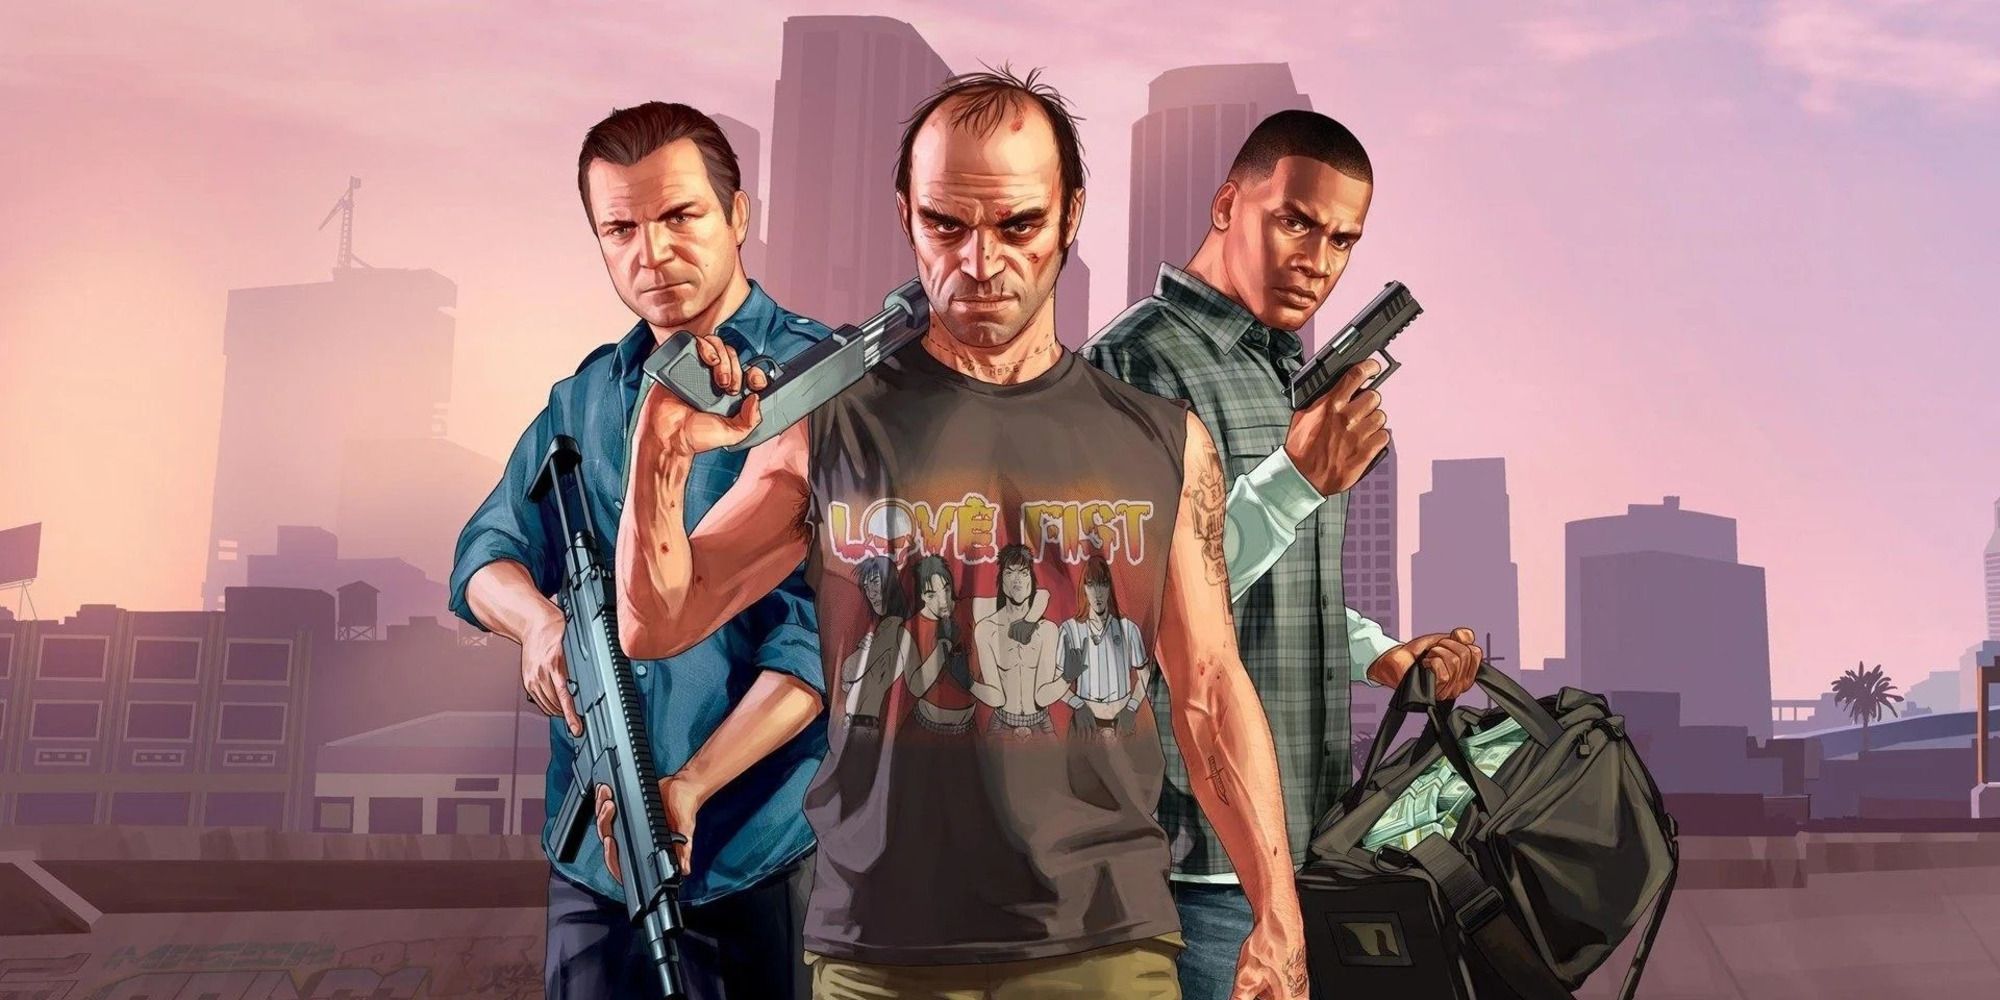 Promotional artwork for GTA 5 showing all the main protagonists.